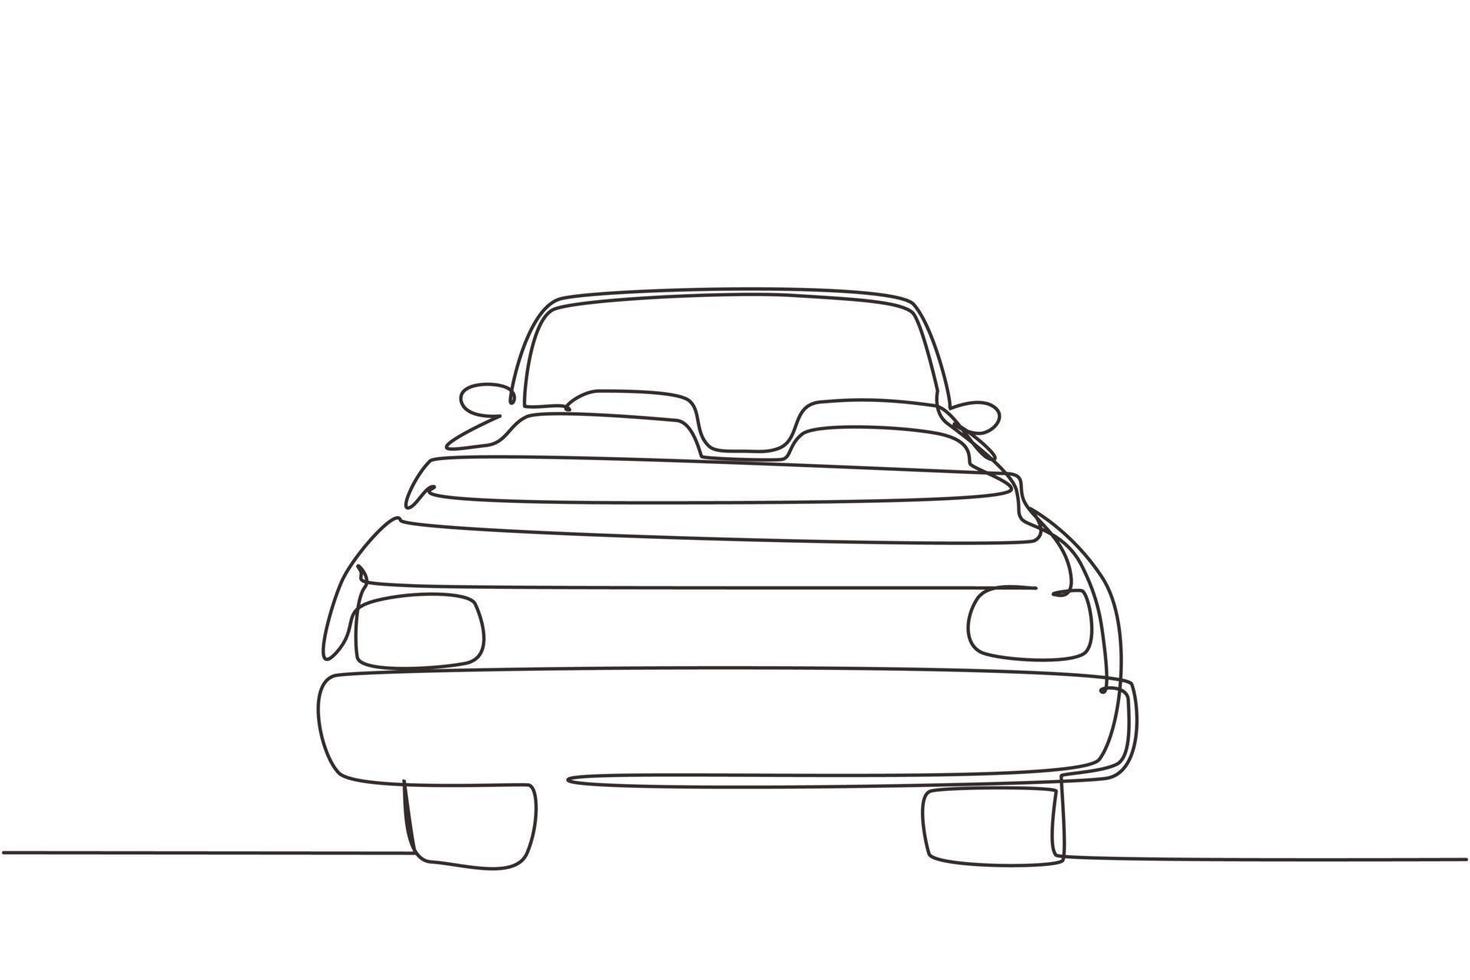 Single one line drawing vintage convertible sports car logo icon. Outline symbol of collectors car and automotive design. Classic motor vehicle. Continuous line draw design graphic vector illustration